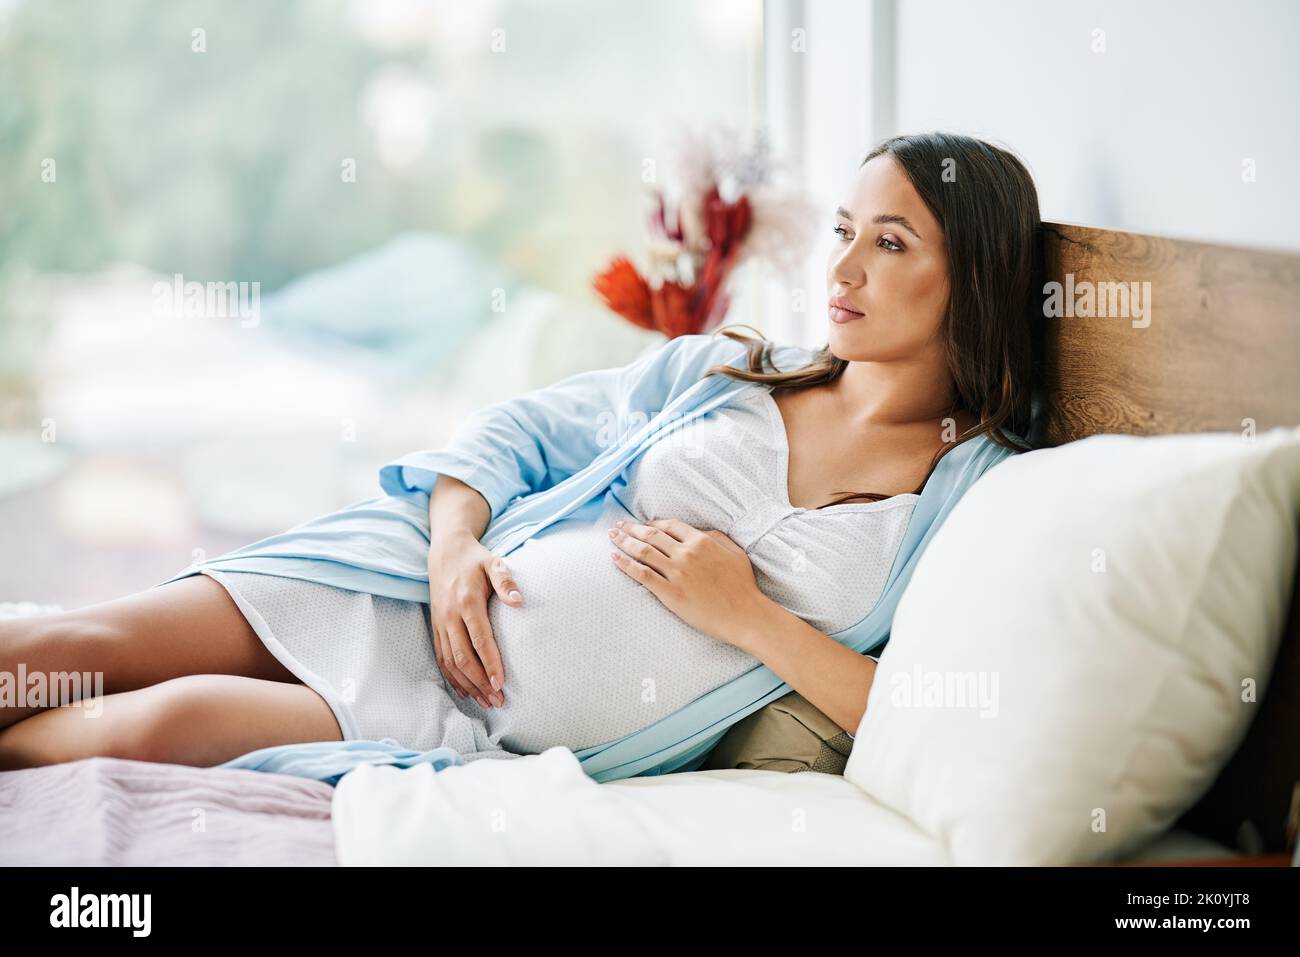 Portrait of happy pregnant woman relax lying in bed and touching her belly at home. Motherhood, people concept. Tender mood photo of pregnancy. Stock Photo